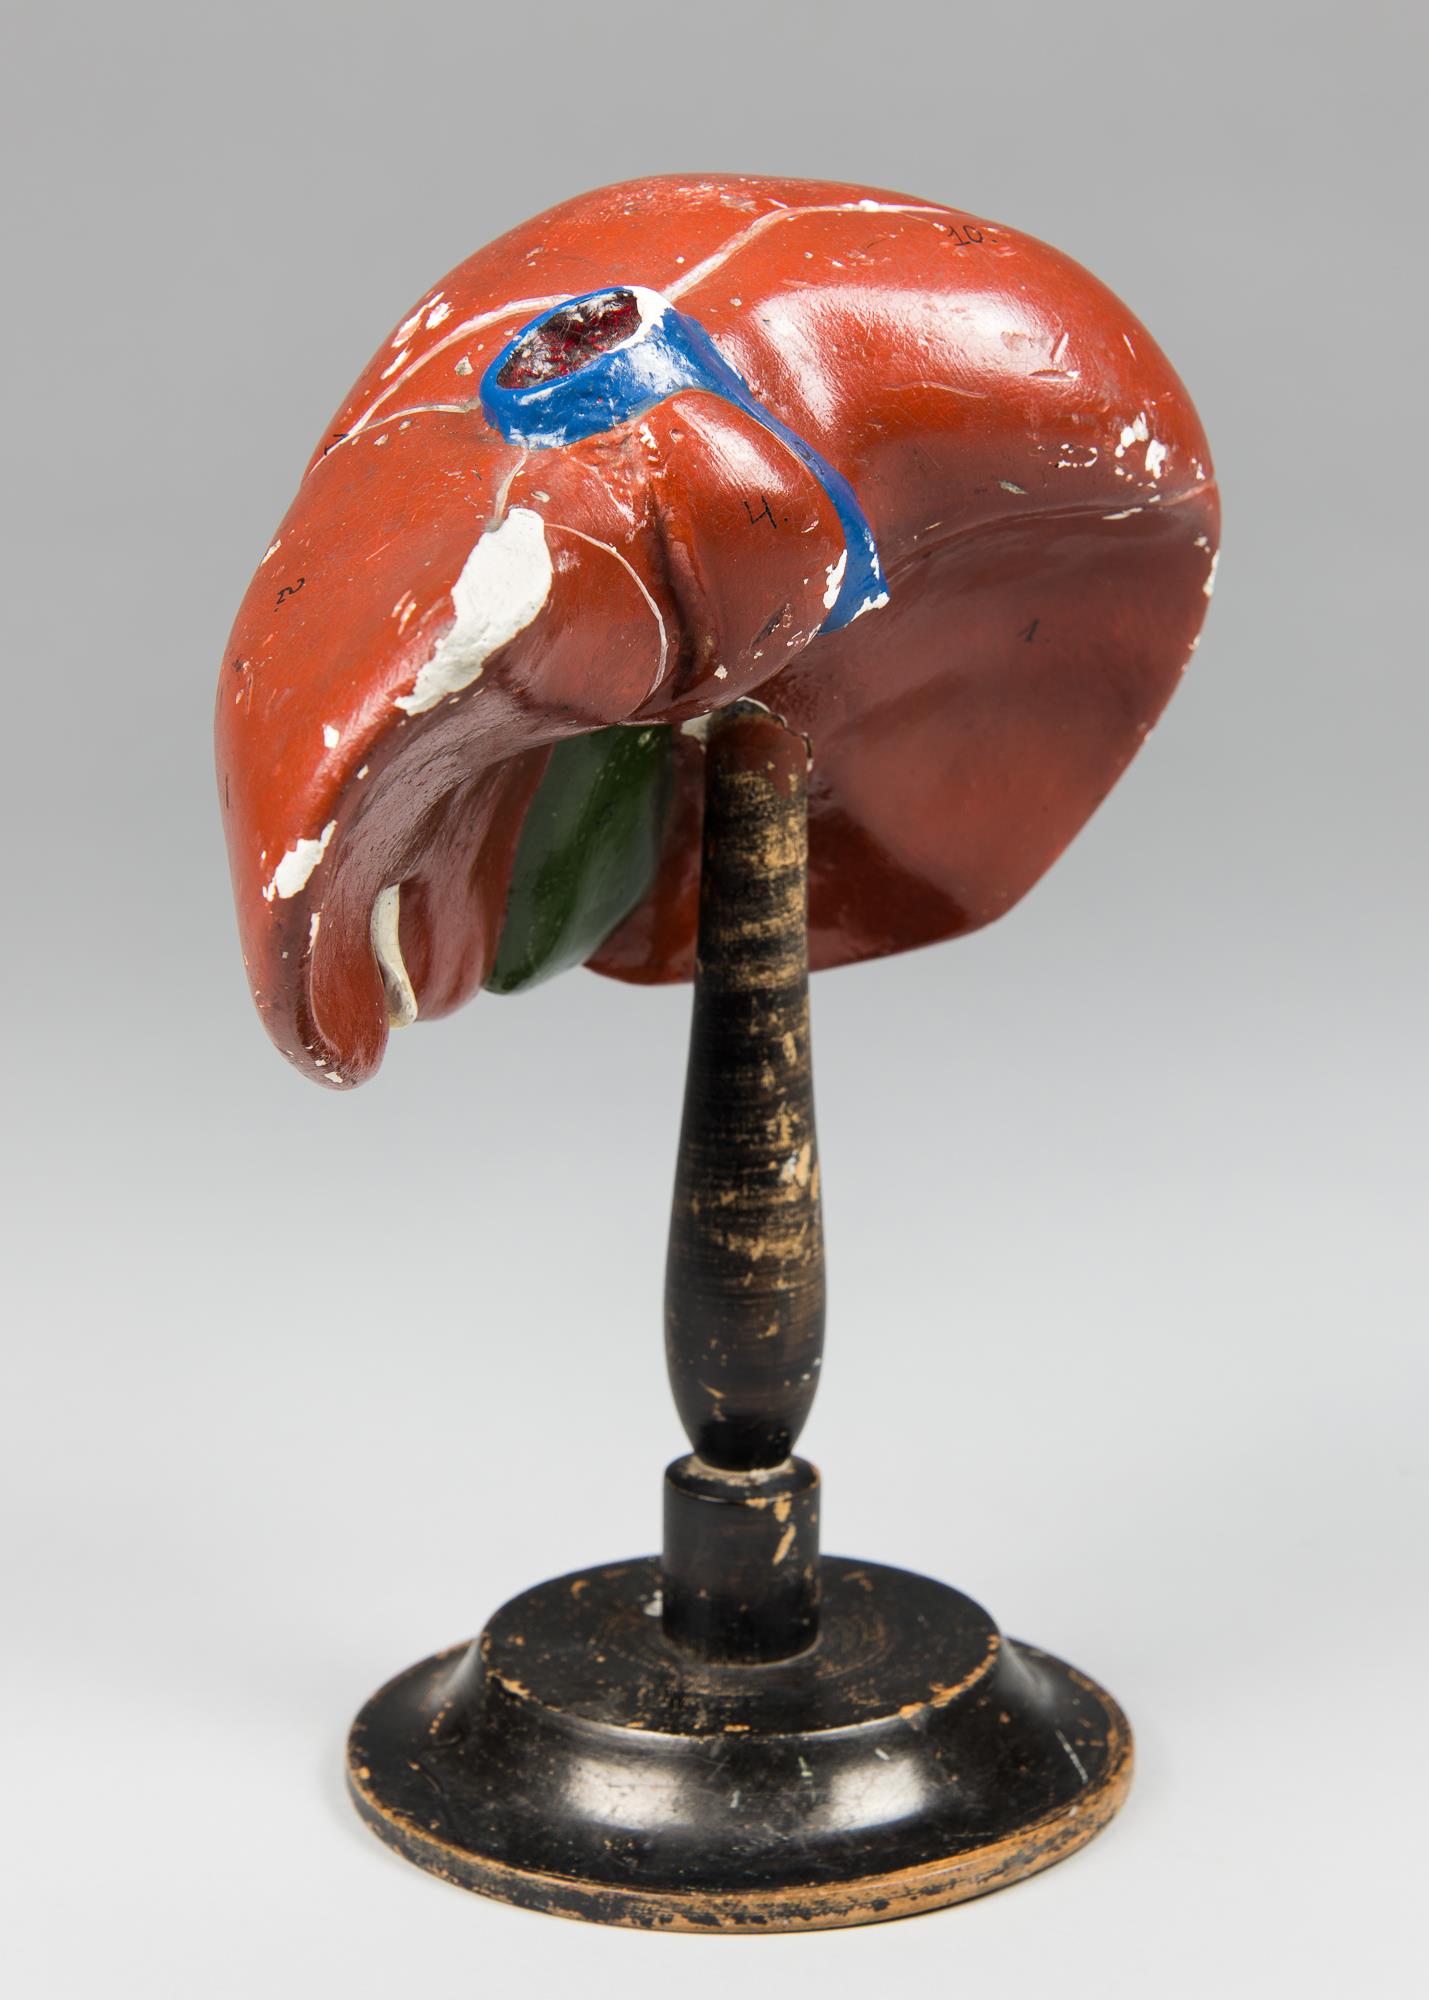 A LATE 19TH CENTURY GERMAN ANATOMICAL MODEL OF A LIVER ON AN EBONISED STAND. The cast and moulded